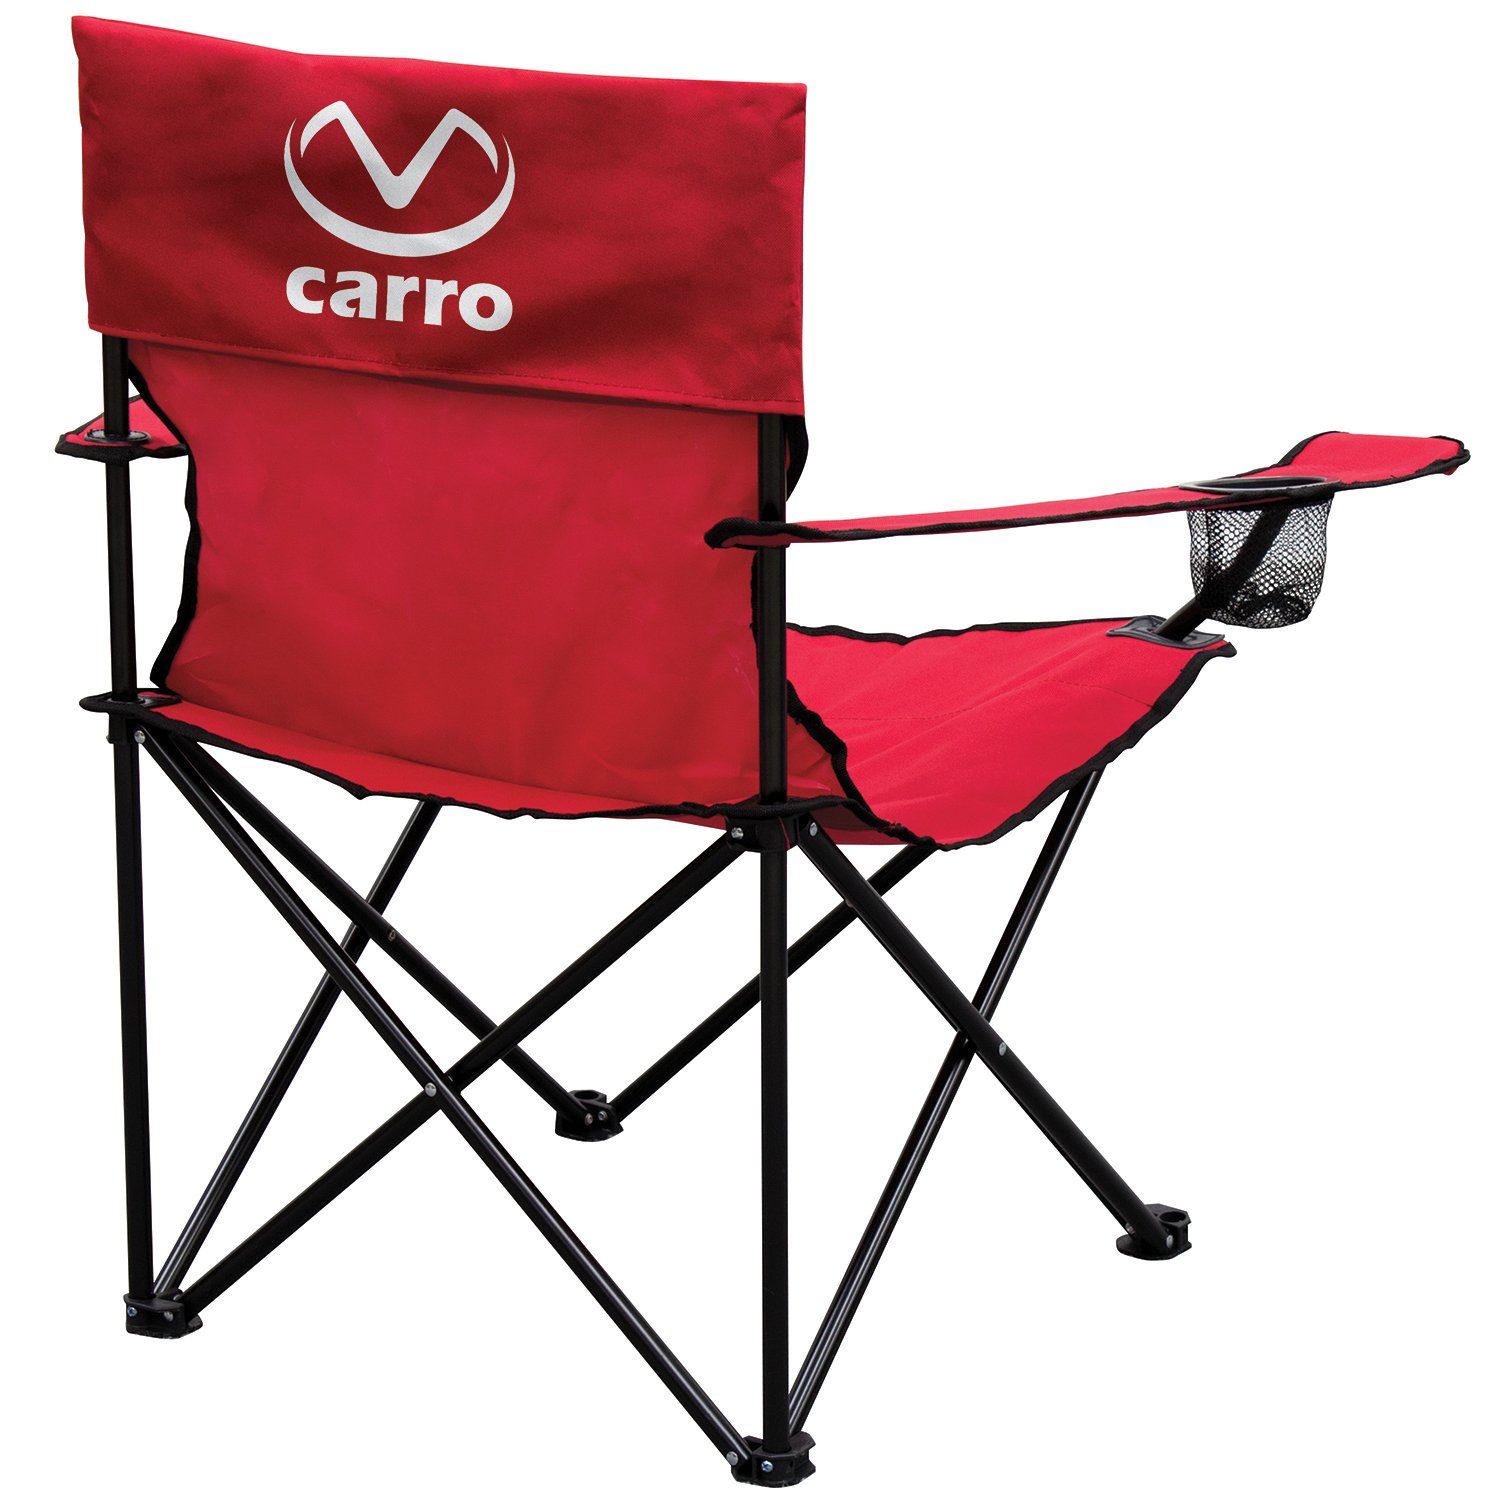 back of red lawn chair with carro decal